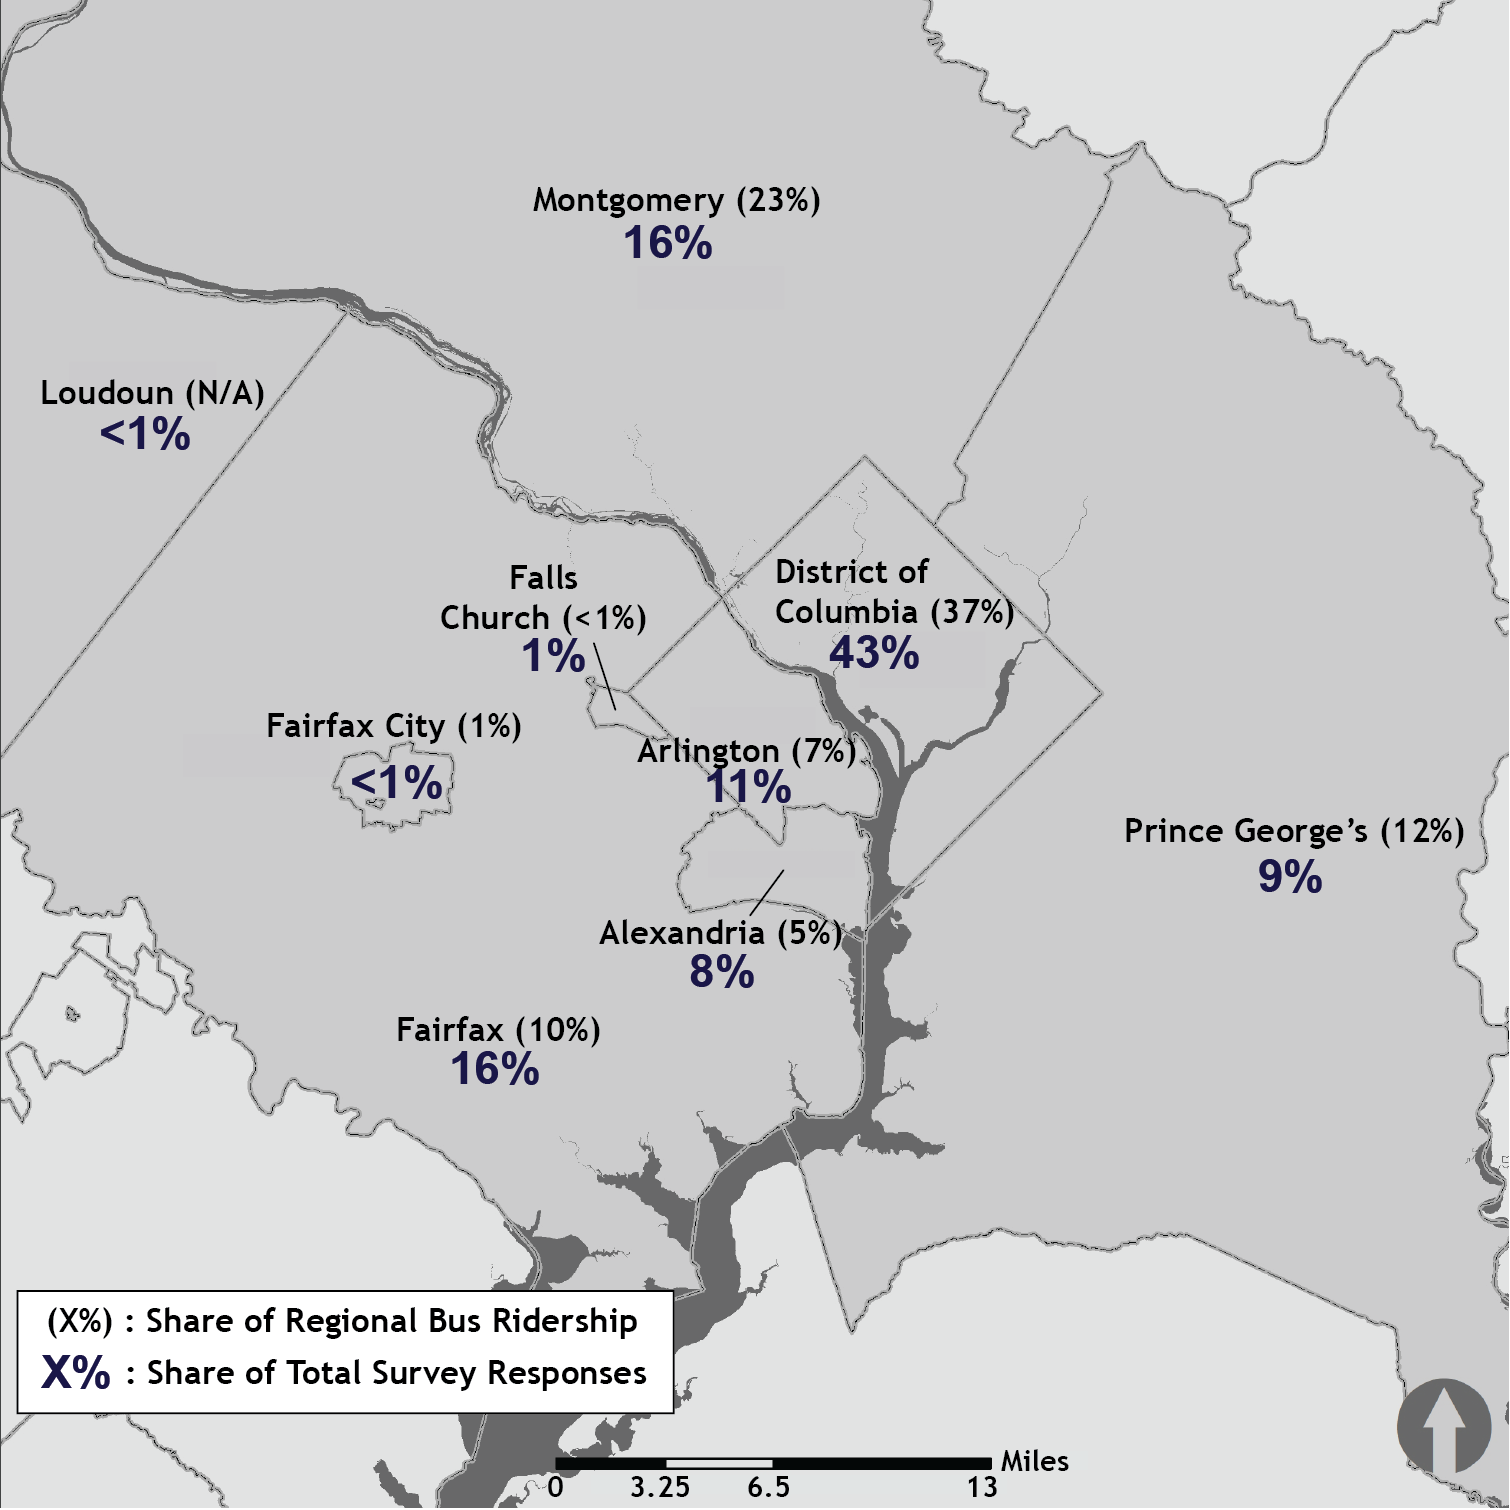 This map shows the percent of survey respondents living in each jurisdiction, and the percent of regional bus ridership that lives in each jurisdiction. Forty-three percent of respondents live in DC and DC residents make up thirty-seven percent of regional bus riders. Arlington County, Virginia residents make up eleven percent of survey respondents and seven percent of regional bus riders. City of Alexandria, Virginia residents made up eight percent of survey respondents and five percent of regional bus riders. City of Falls Church, Virginia residents made up one percent of survey respondents and less than one percent of regional bus ridership. Prince George’s County, Maryland residents make up nine percent of survey respondents and twelve percent of regional bus riders. Montgomery County, Maryland residents made up sixteen percent of survey respondents and make up twenty-three percent of regional bus riders. Fairfax County, Virginia residents made up sixteen percent of survey respondents and ten percent of regional bus riders. Residents of Loudoun County, Virginia made up less than one percent of survey respondents and make up less than one percent of the region’s bus riders.